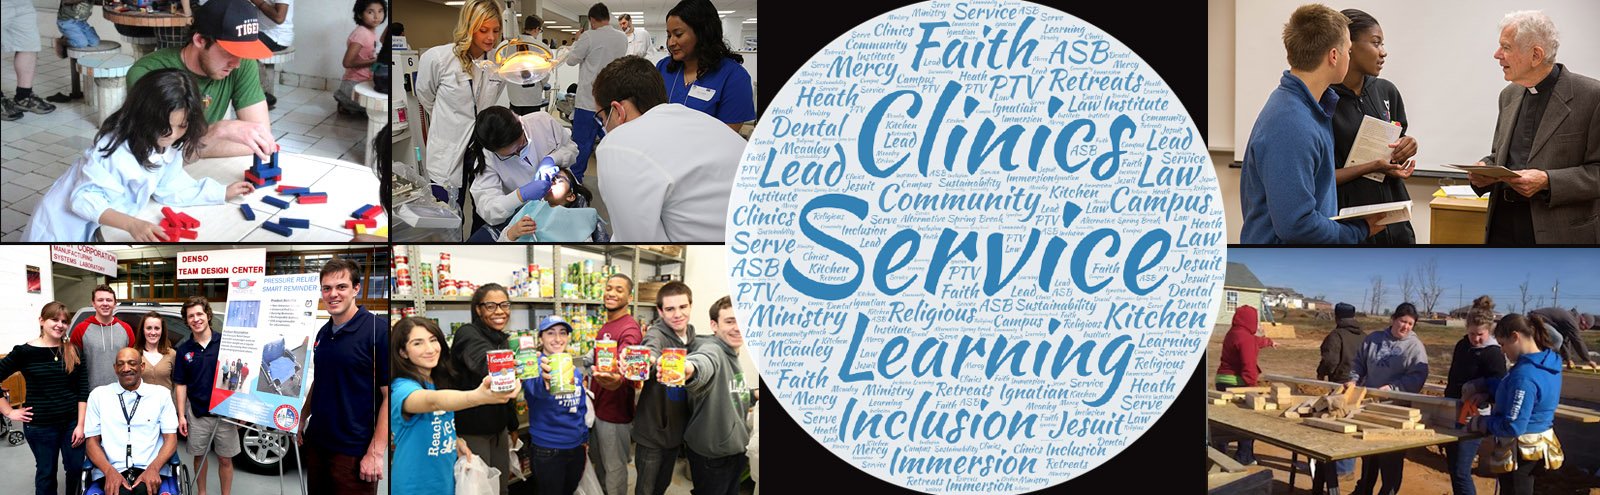 Word art about service and community from this page content